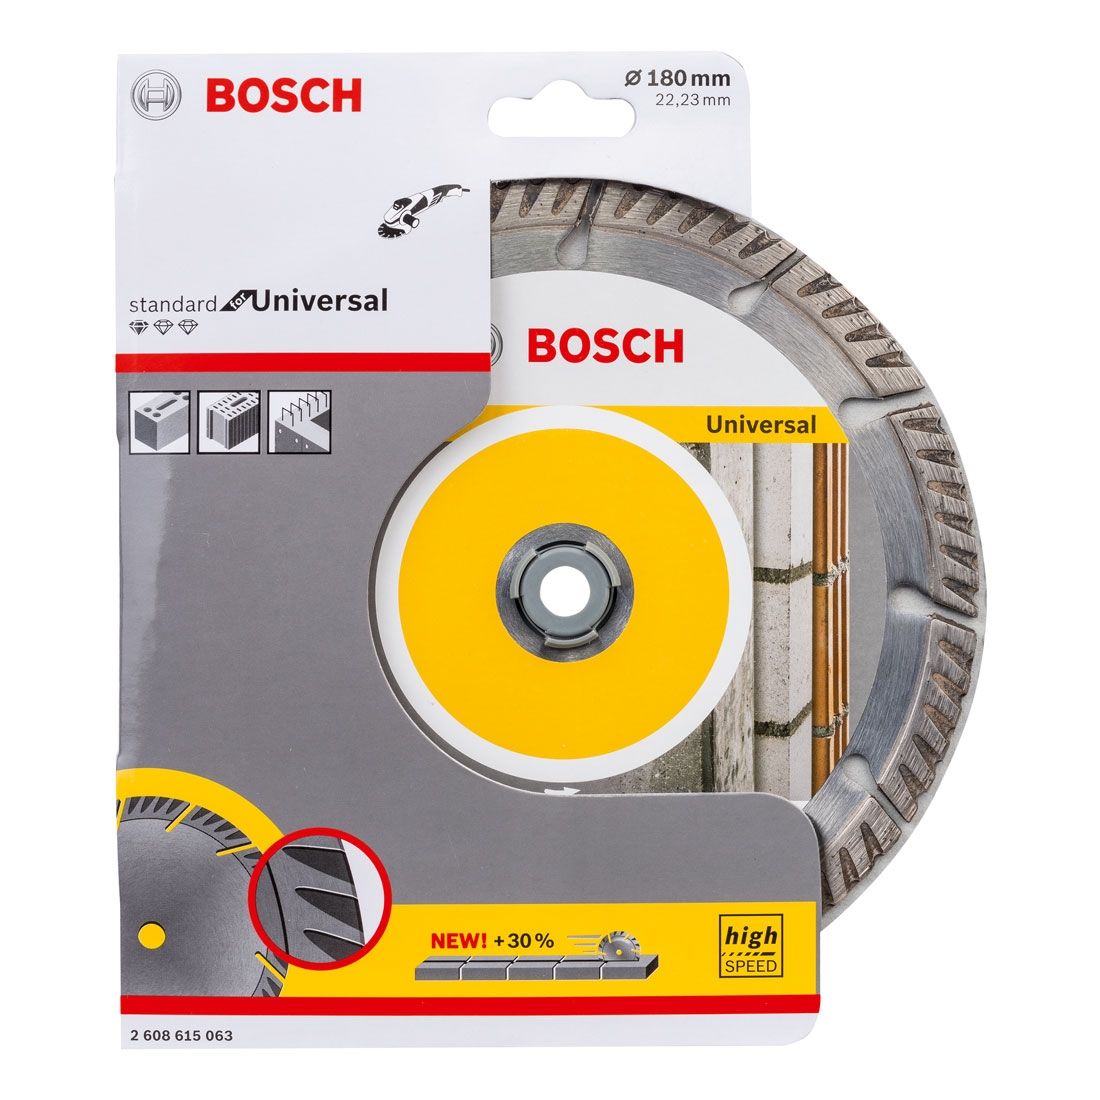 Bosch Standard for Universal 180 x 22,23 x 2, segmented 2608615063 Power Tool Services